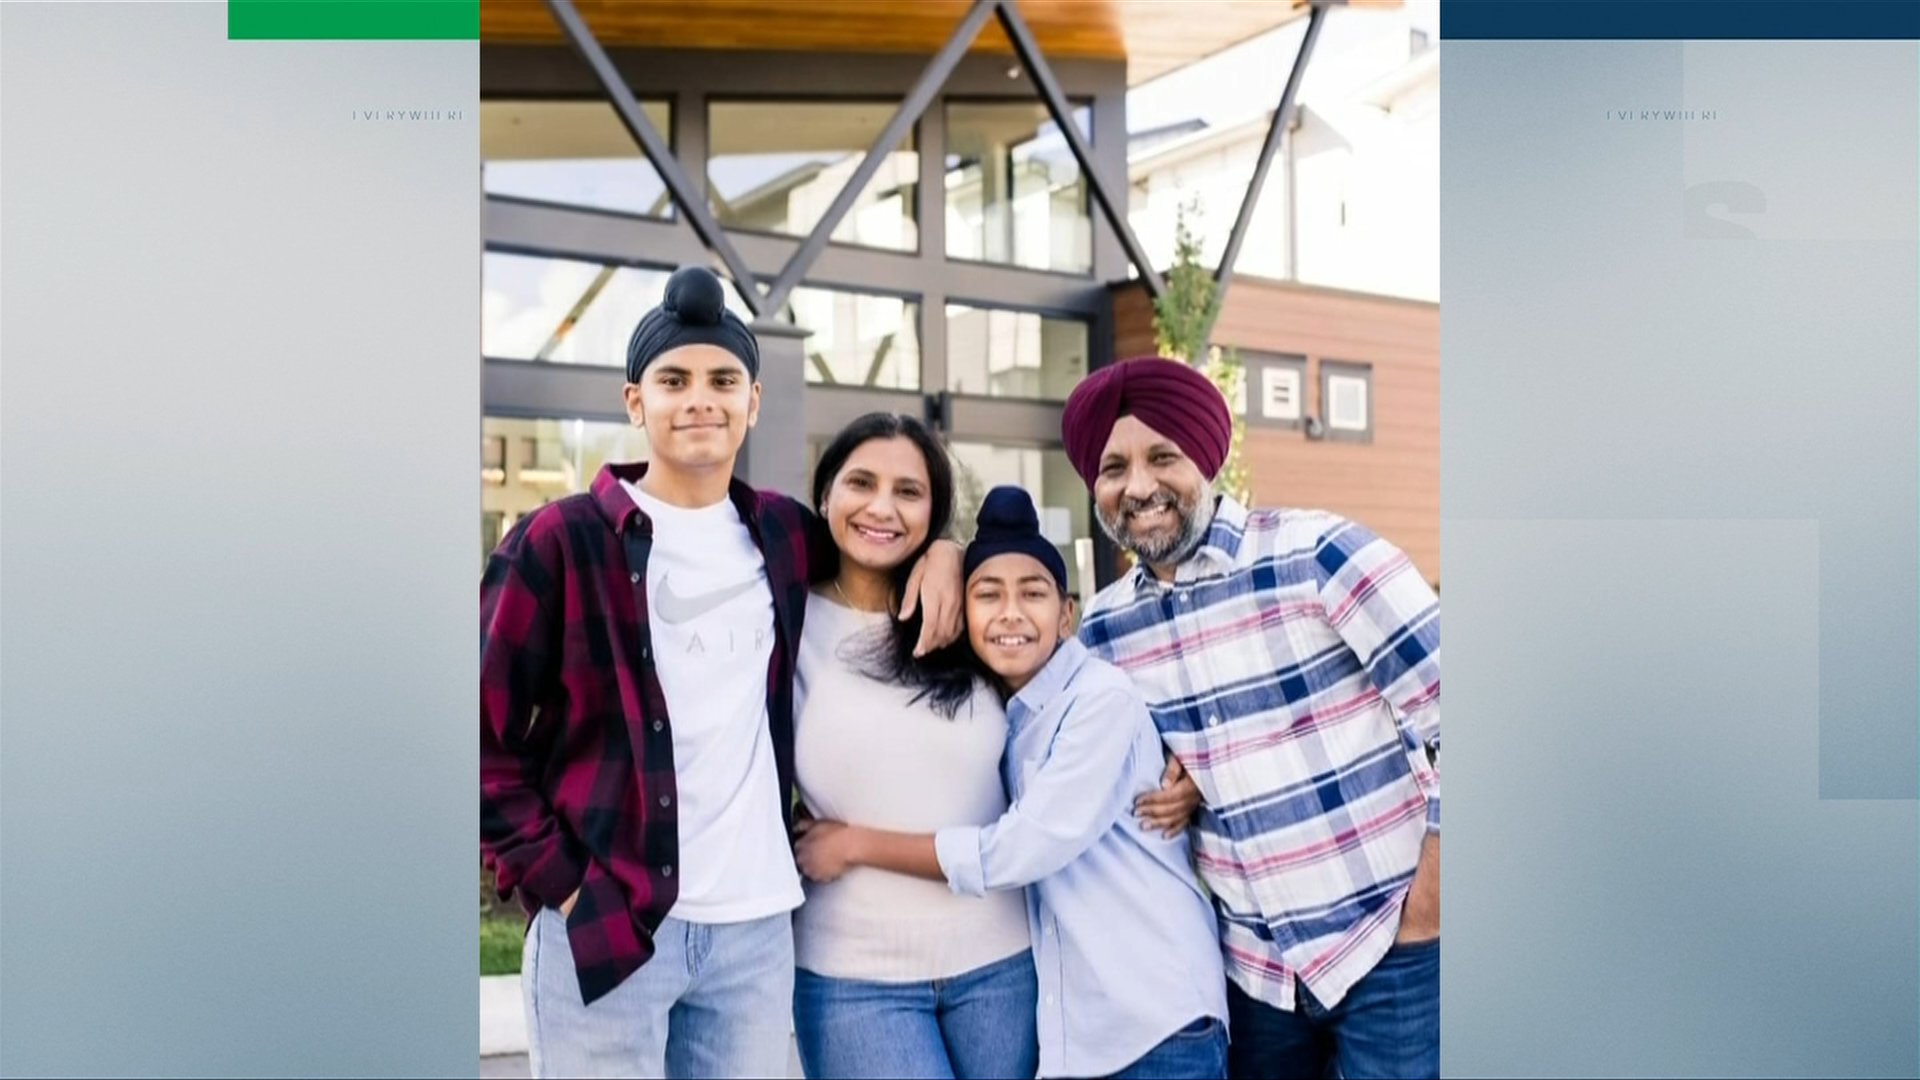 Jasmeet Singh (right) and his family.